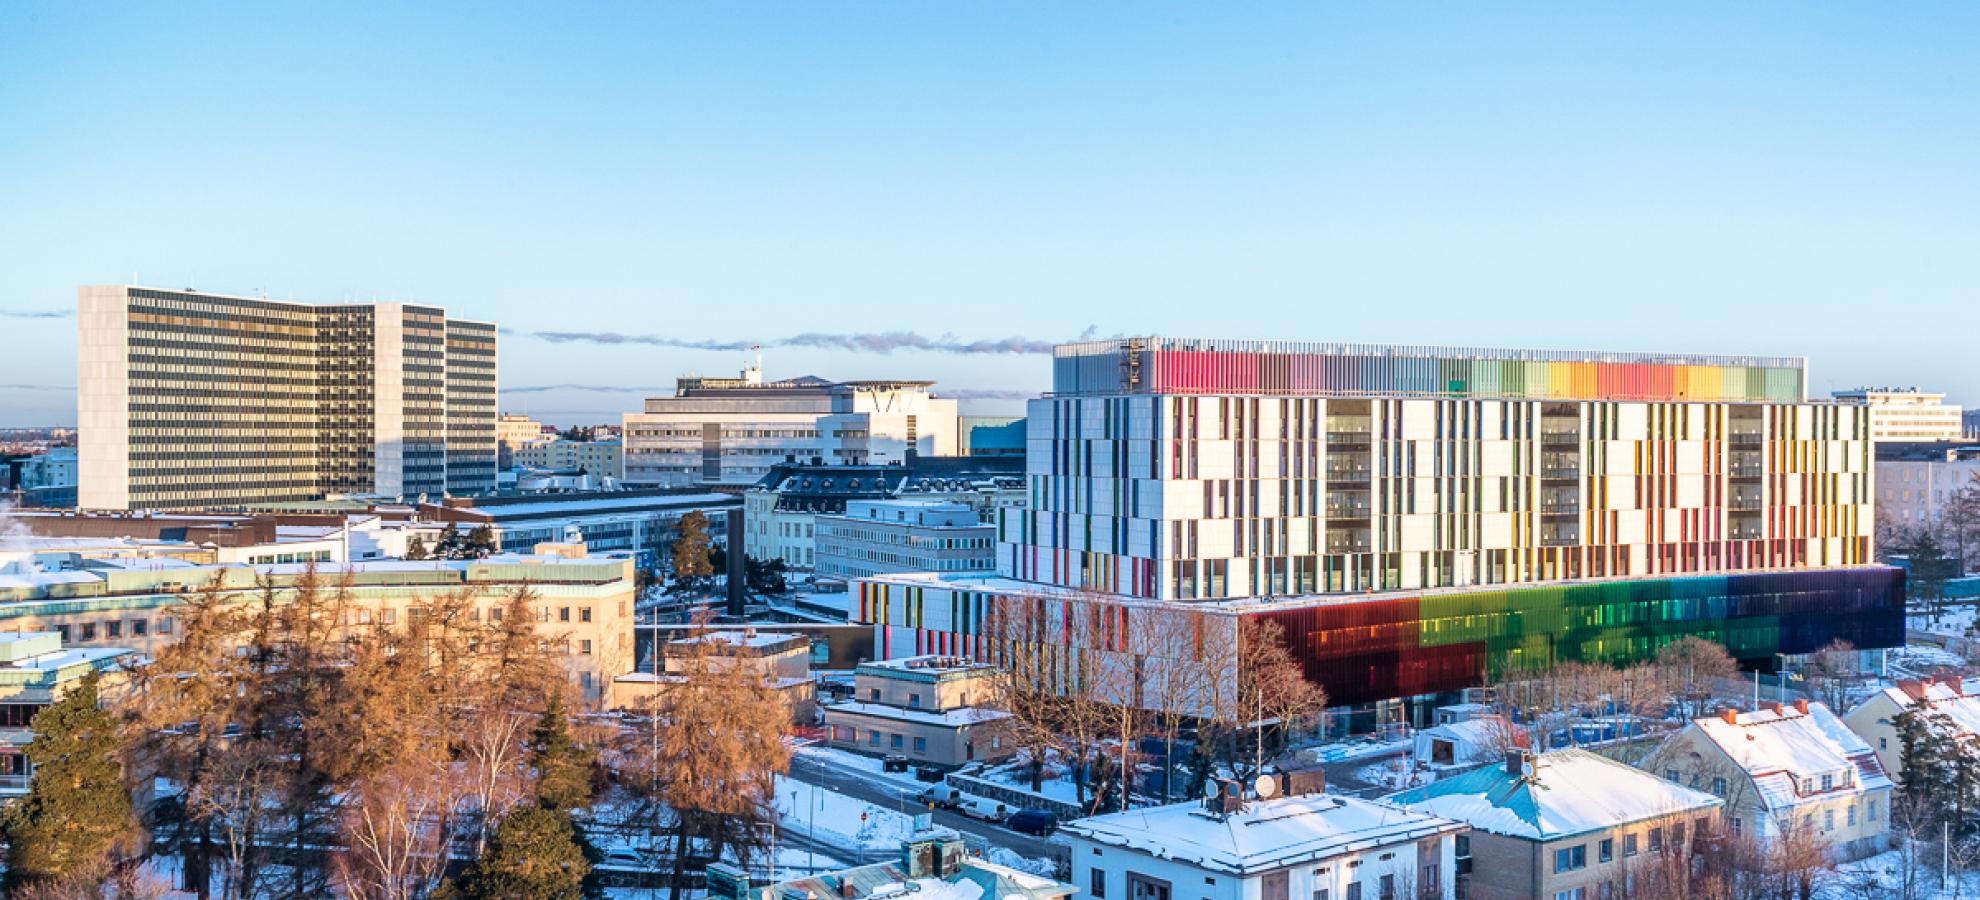 A view taken from a height of Helsinki Children's Hospital in Meilahti, a colourful building surrounded by other houses, offices and hospital buildings. There is snow on the ground. 